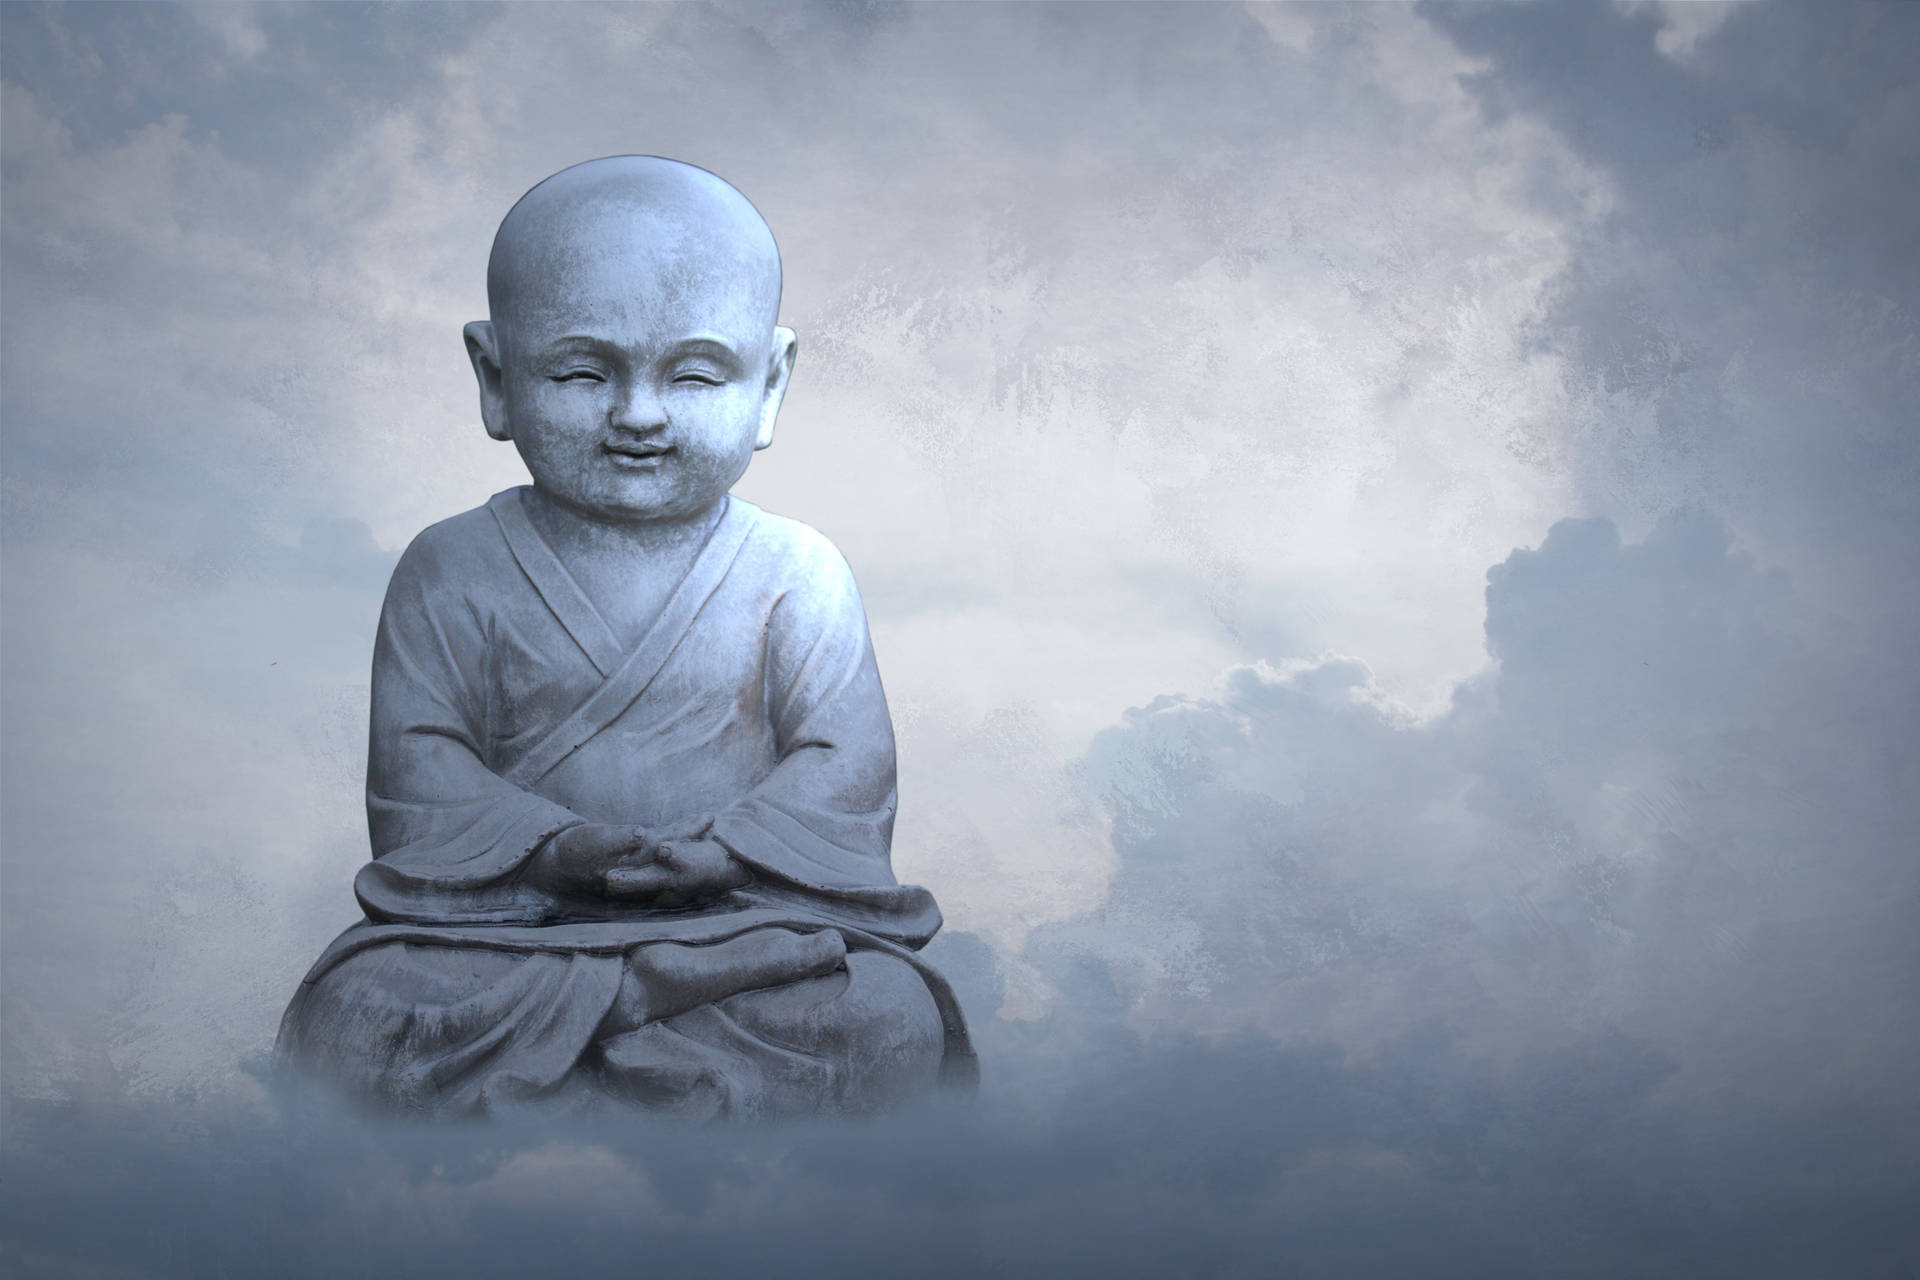 “Buddha in the Clouds” Wallpaper